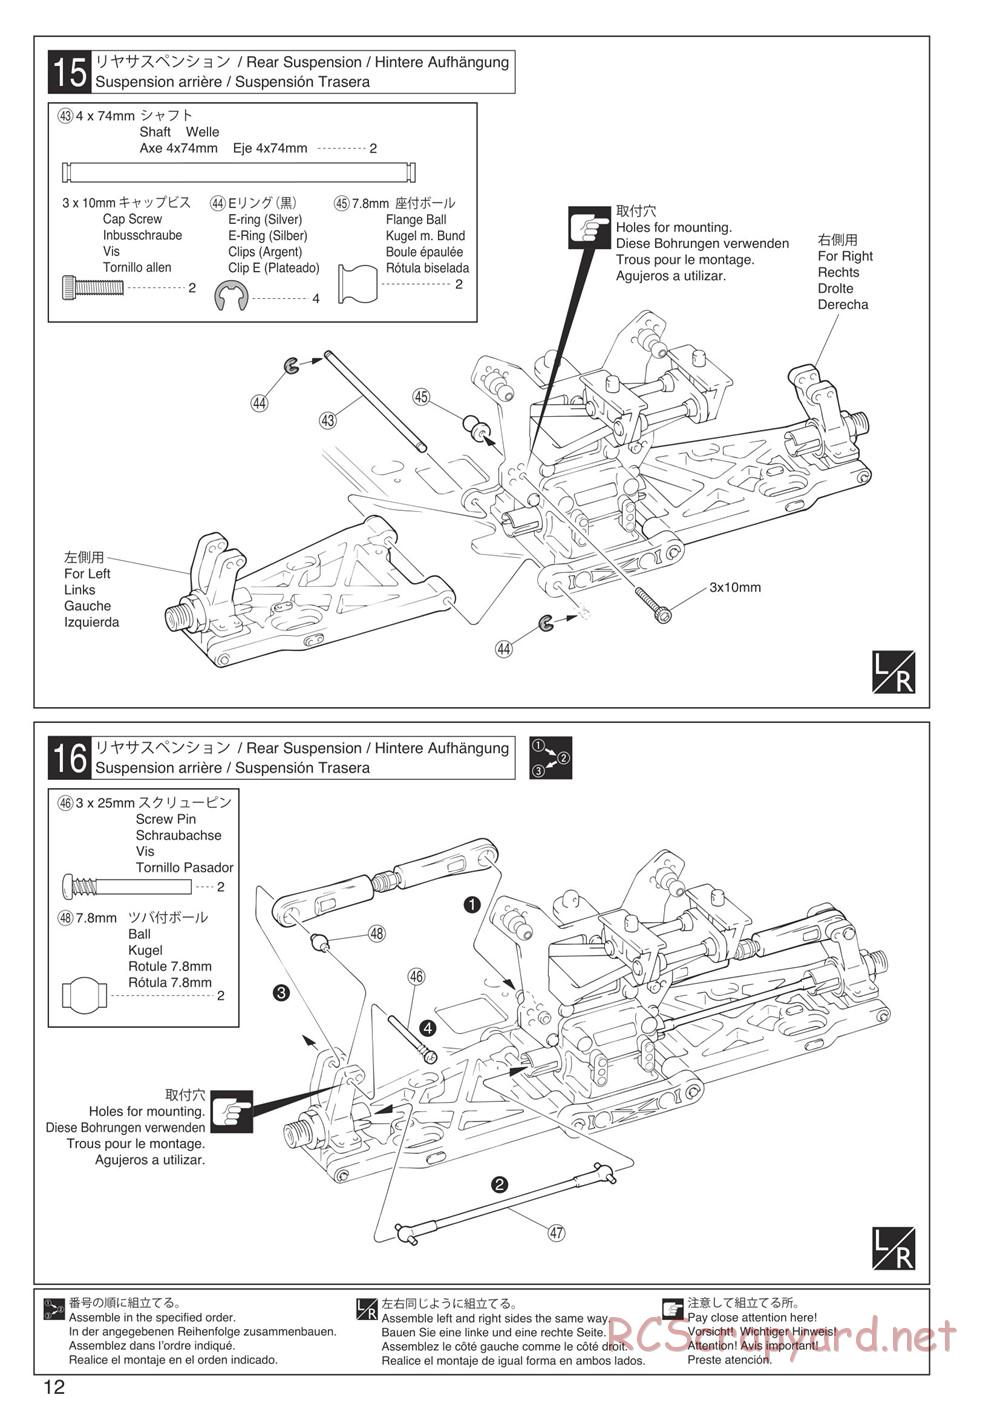 Kyosho - Inferno Neo - Manual - Page 12